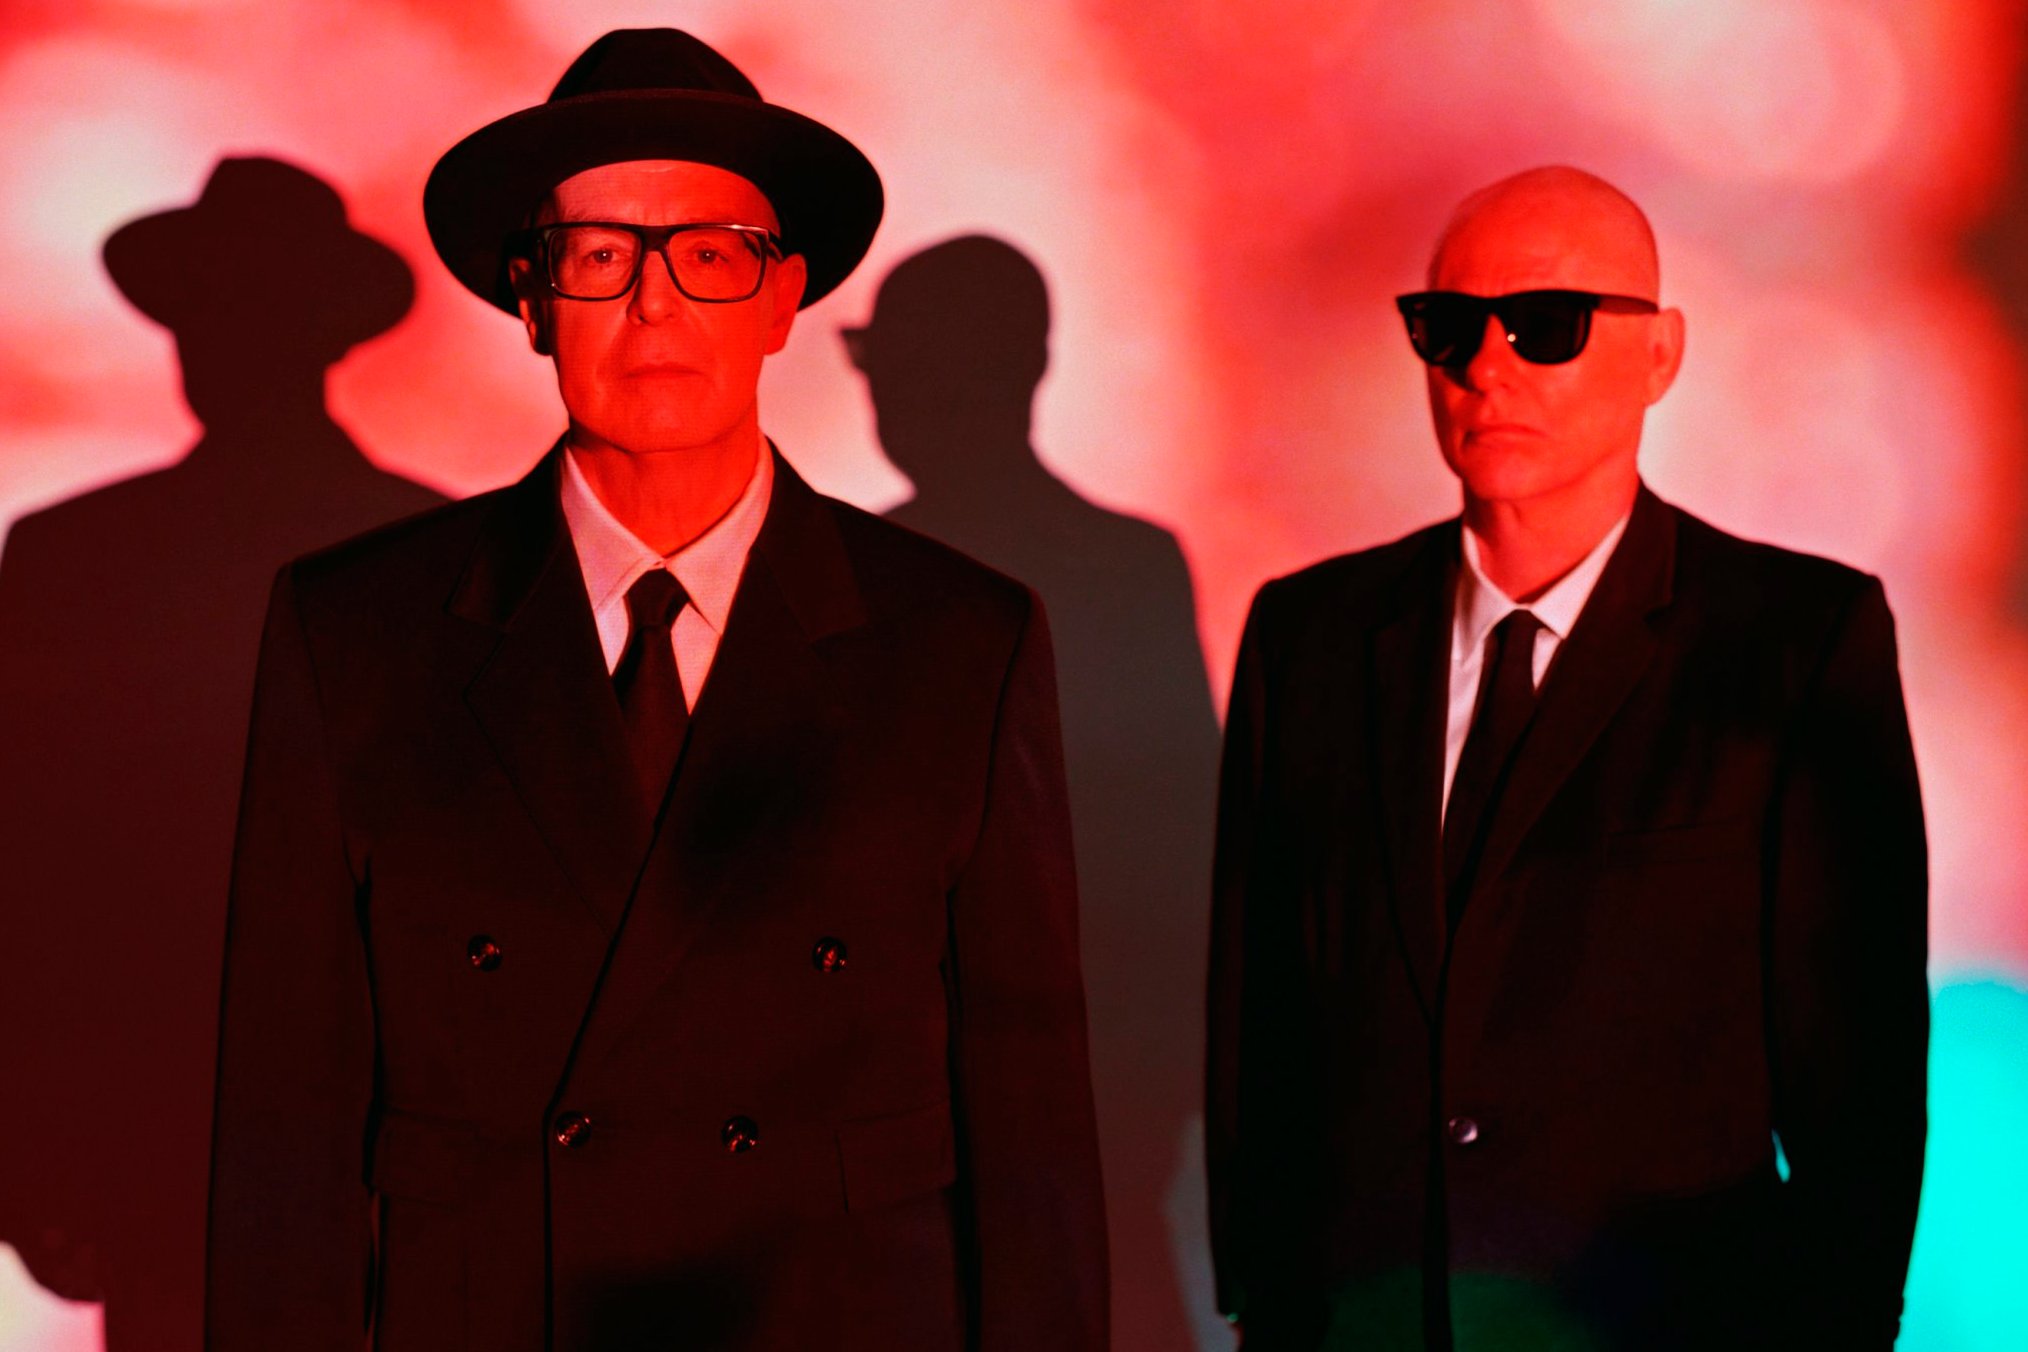 Pet Shop Boys’ Nonetheless doesn’t have the magic they’re capable of